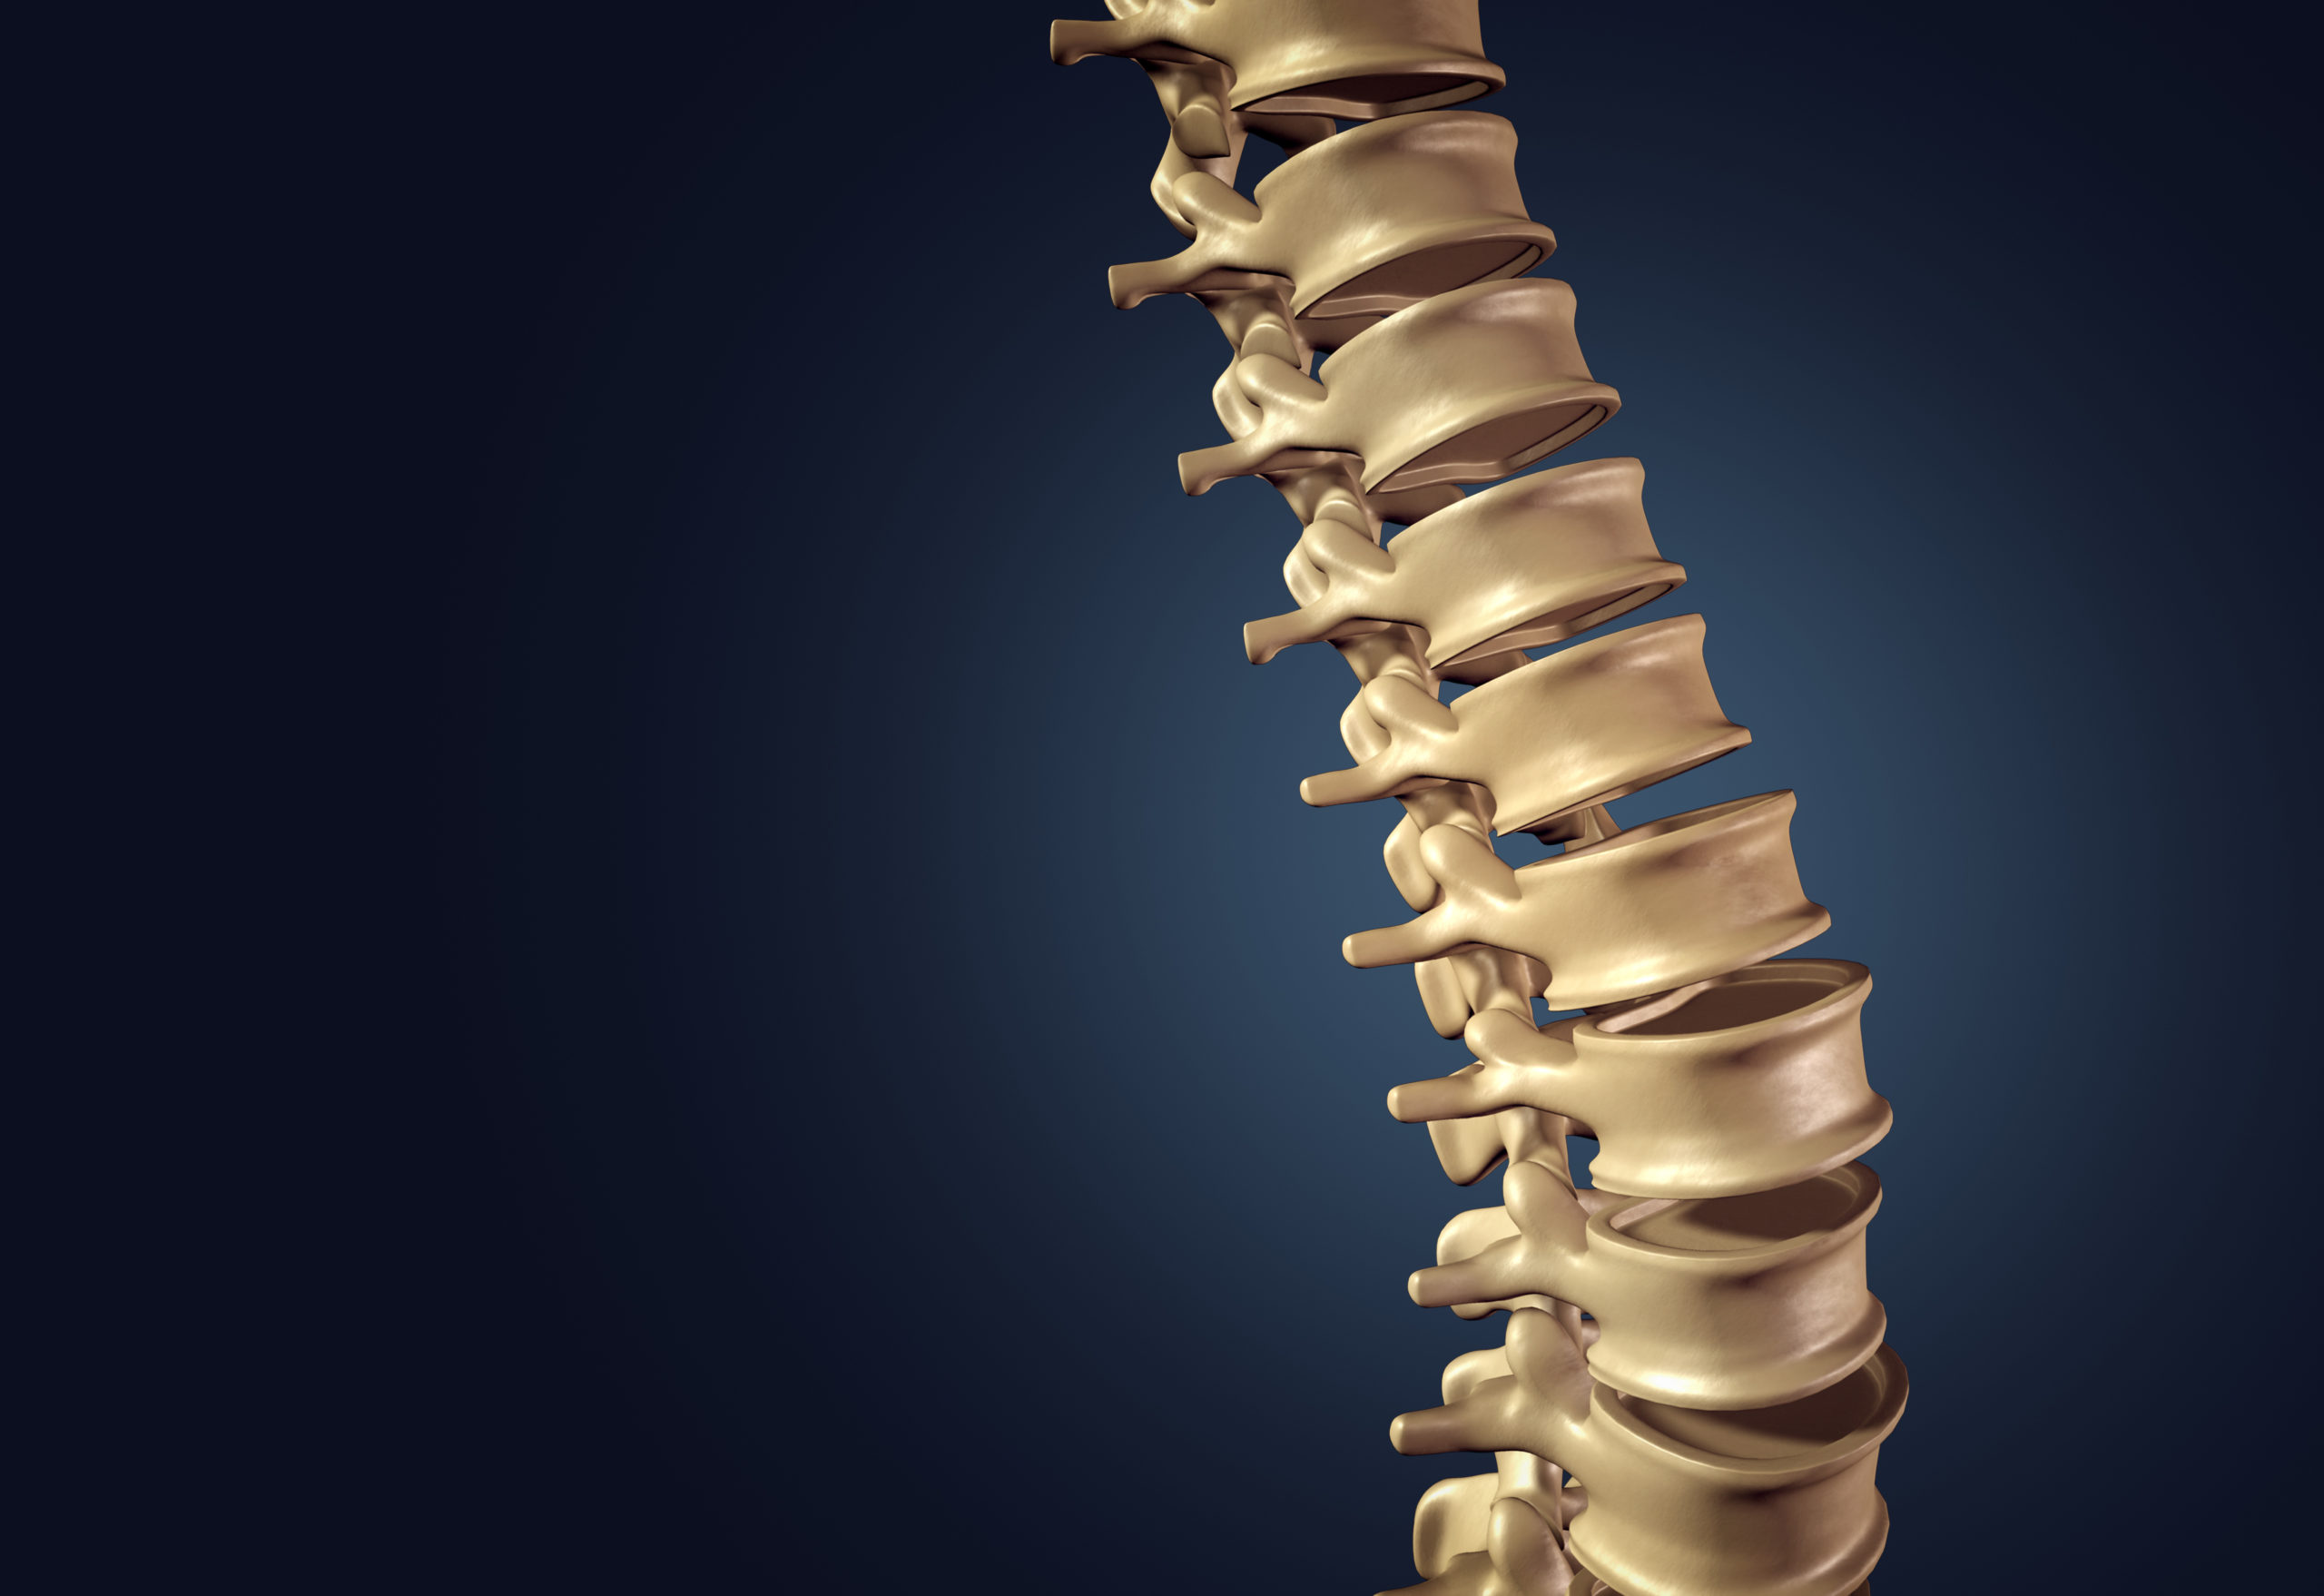 Spinal Implant